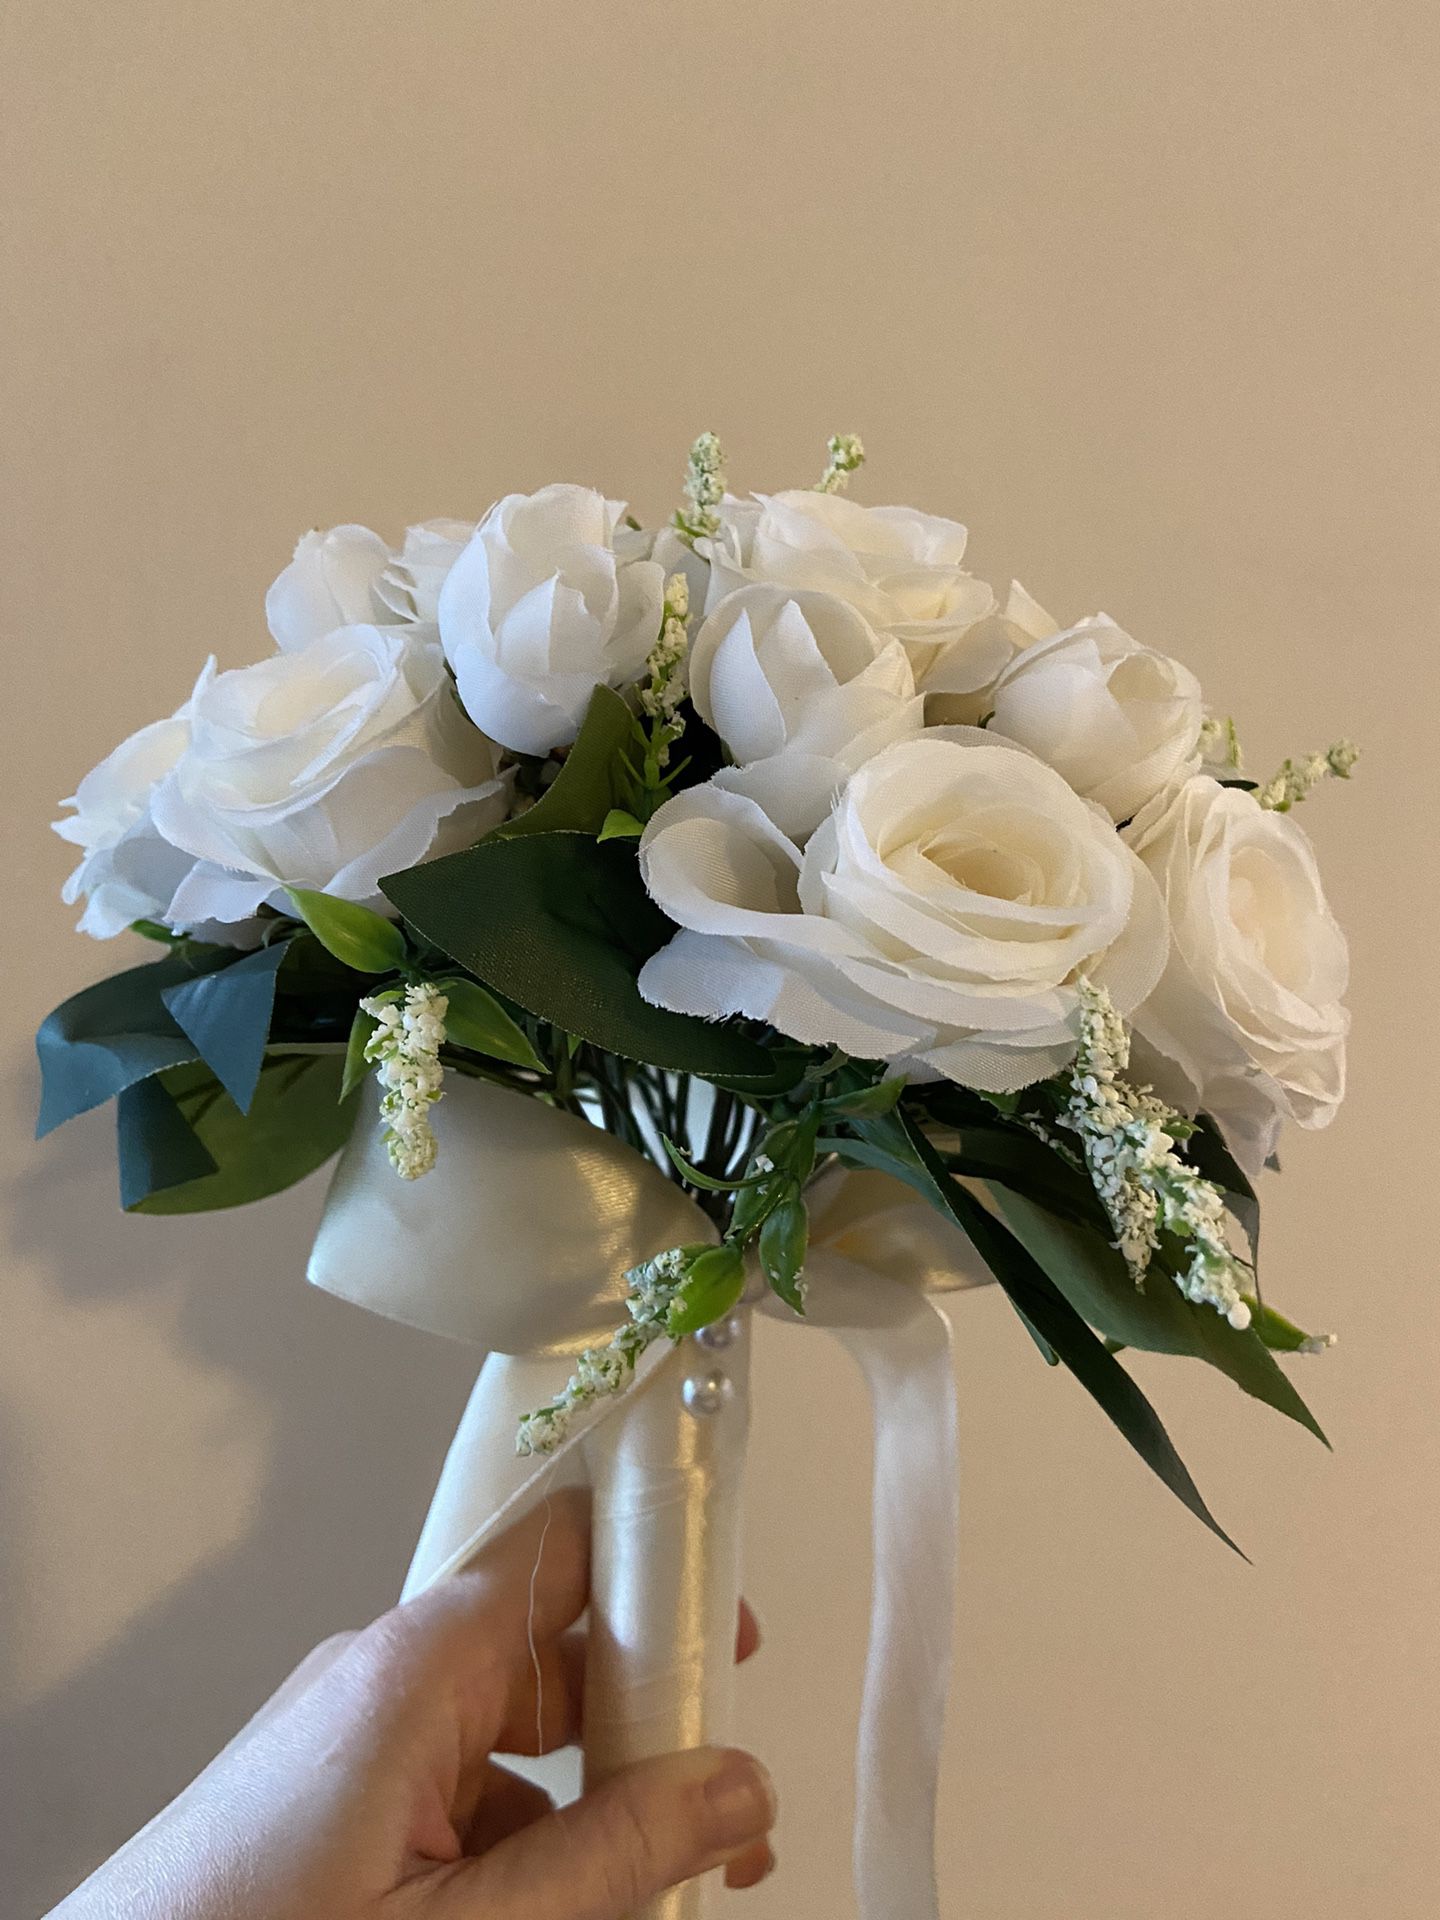 Holding Flowers Artificial Natural Rose Wedding Bouquet with Silk Satin Ribbon Pink White Champagne Bridesmaid Bridal Party Color: white Message me if